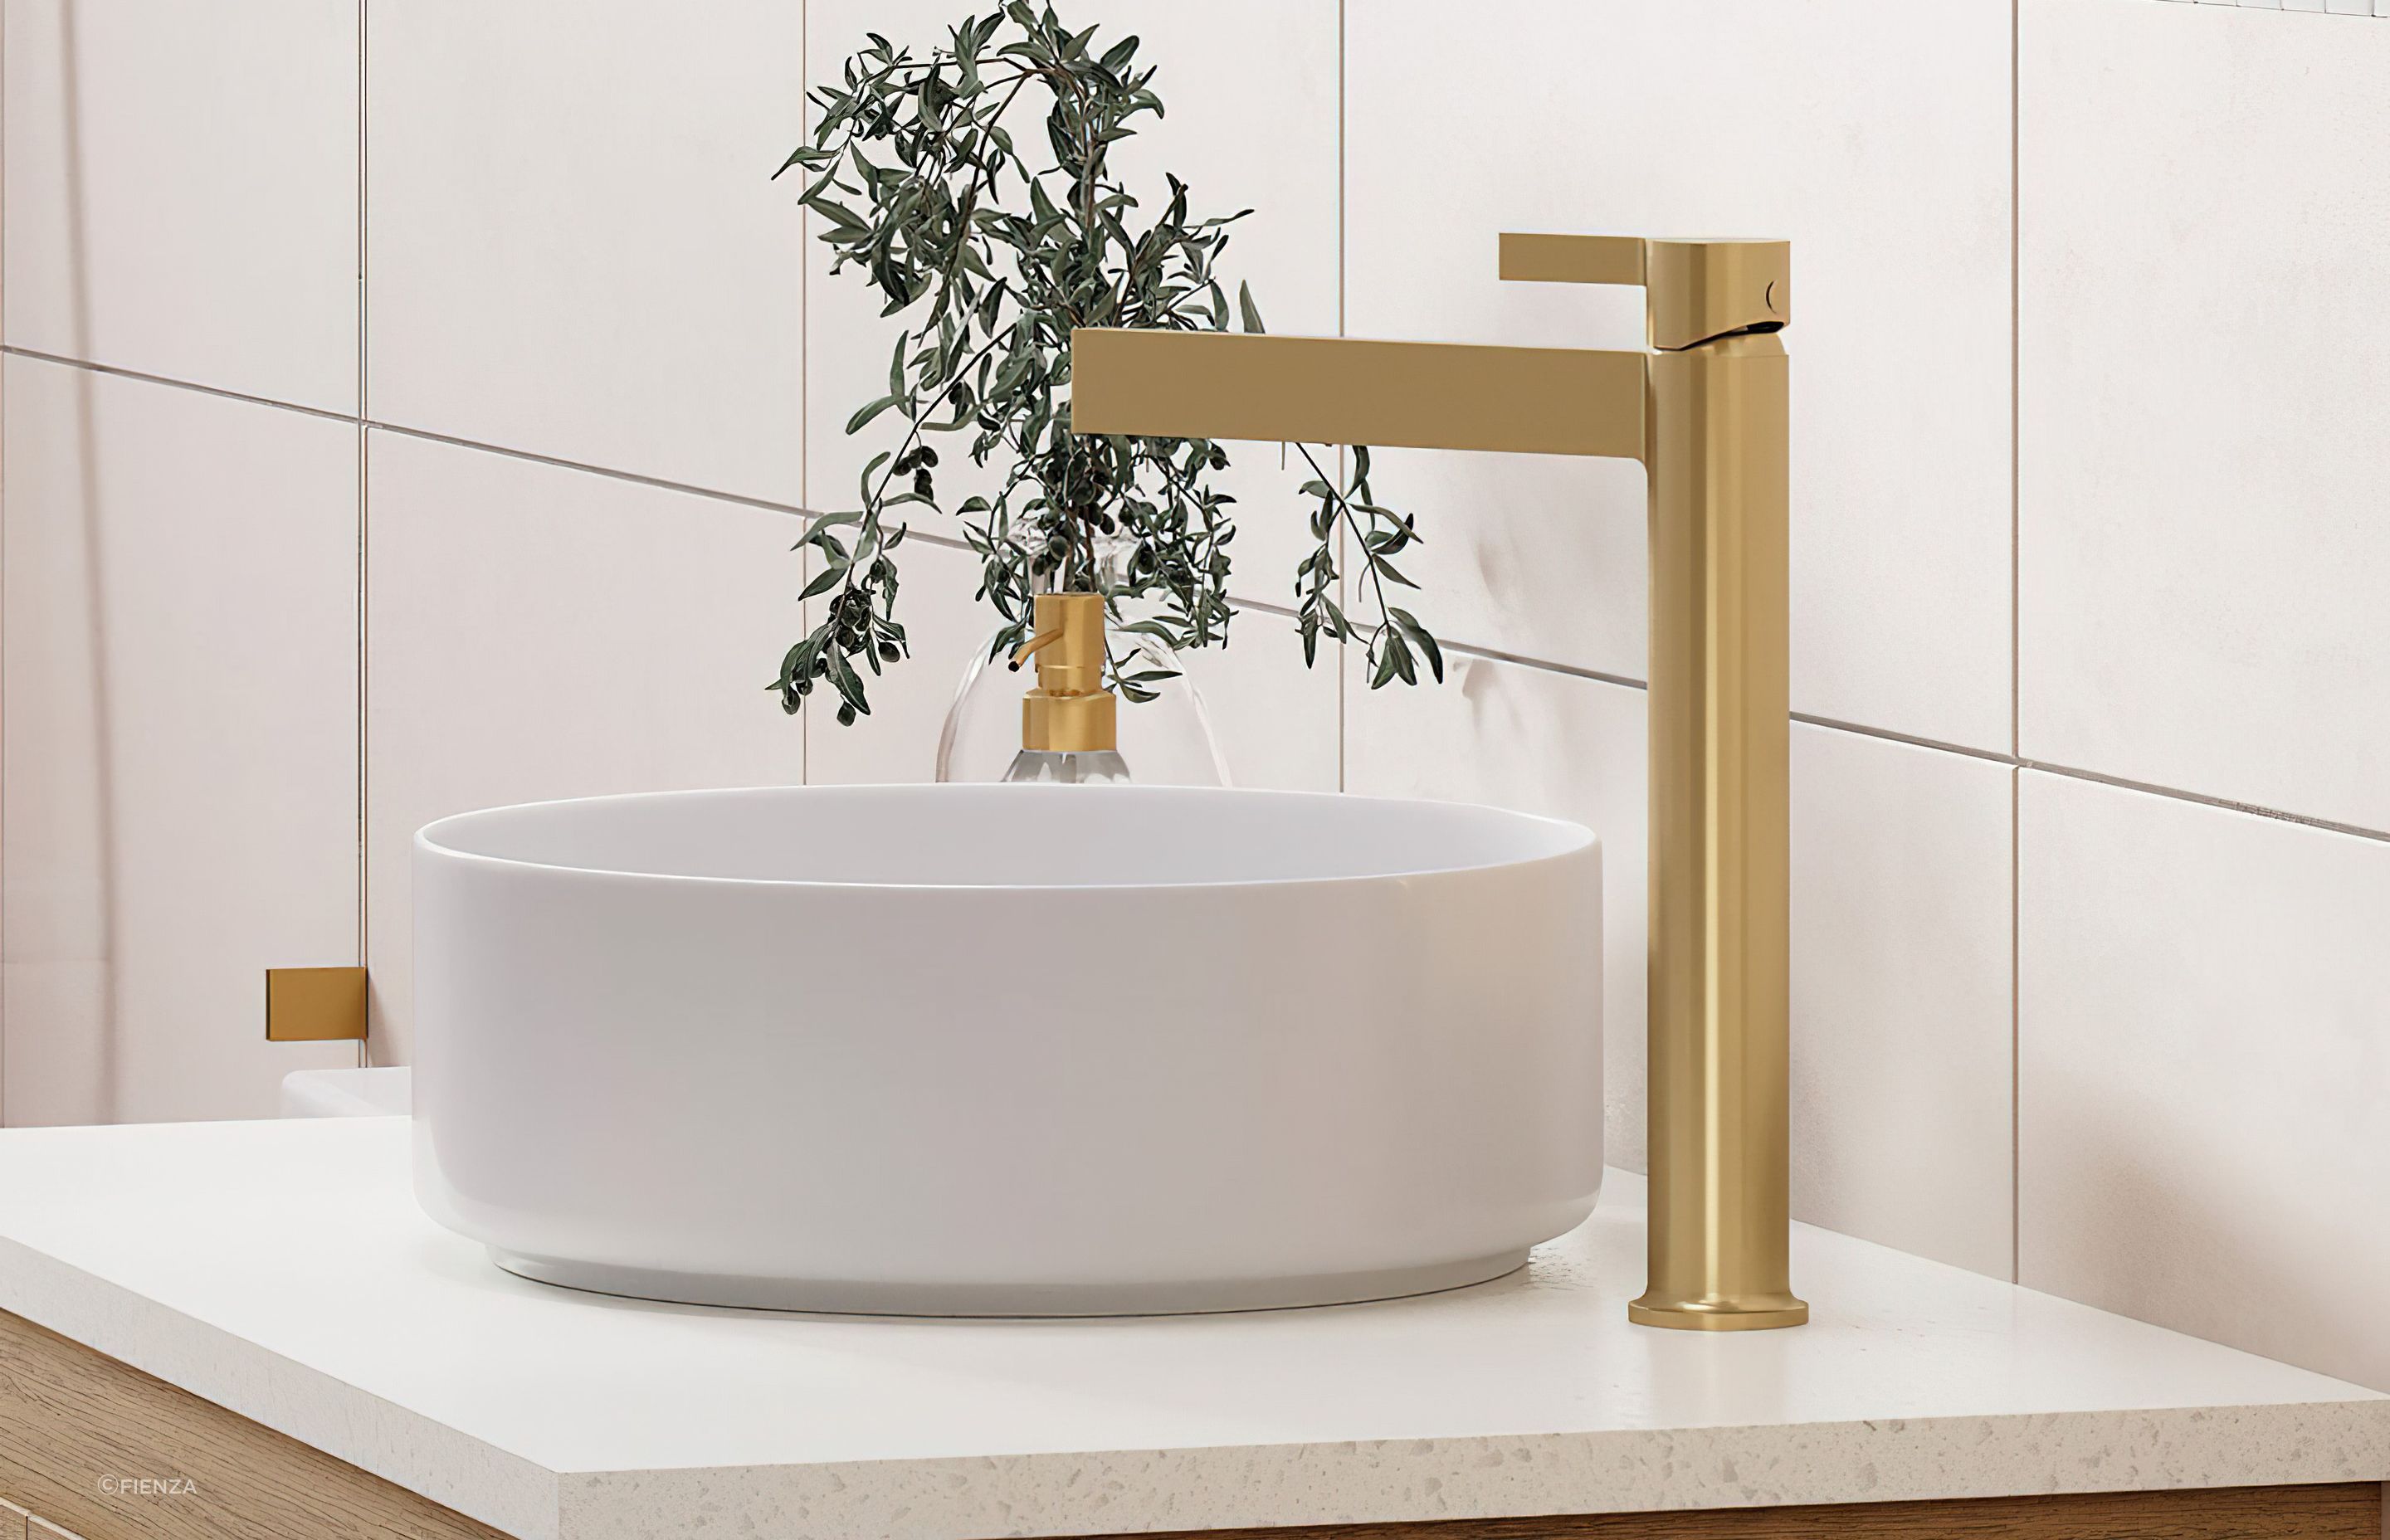 The Sansa Tall Basin Mixer combines the old with the new with immaculate style